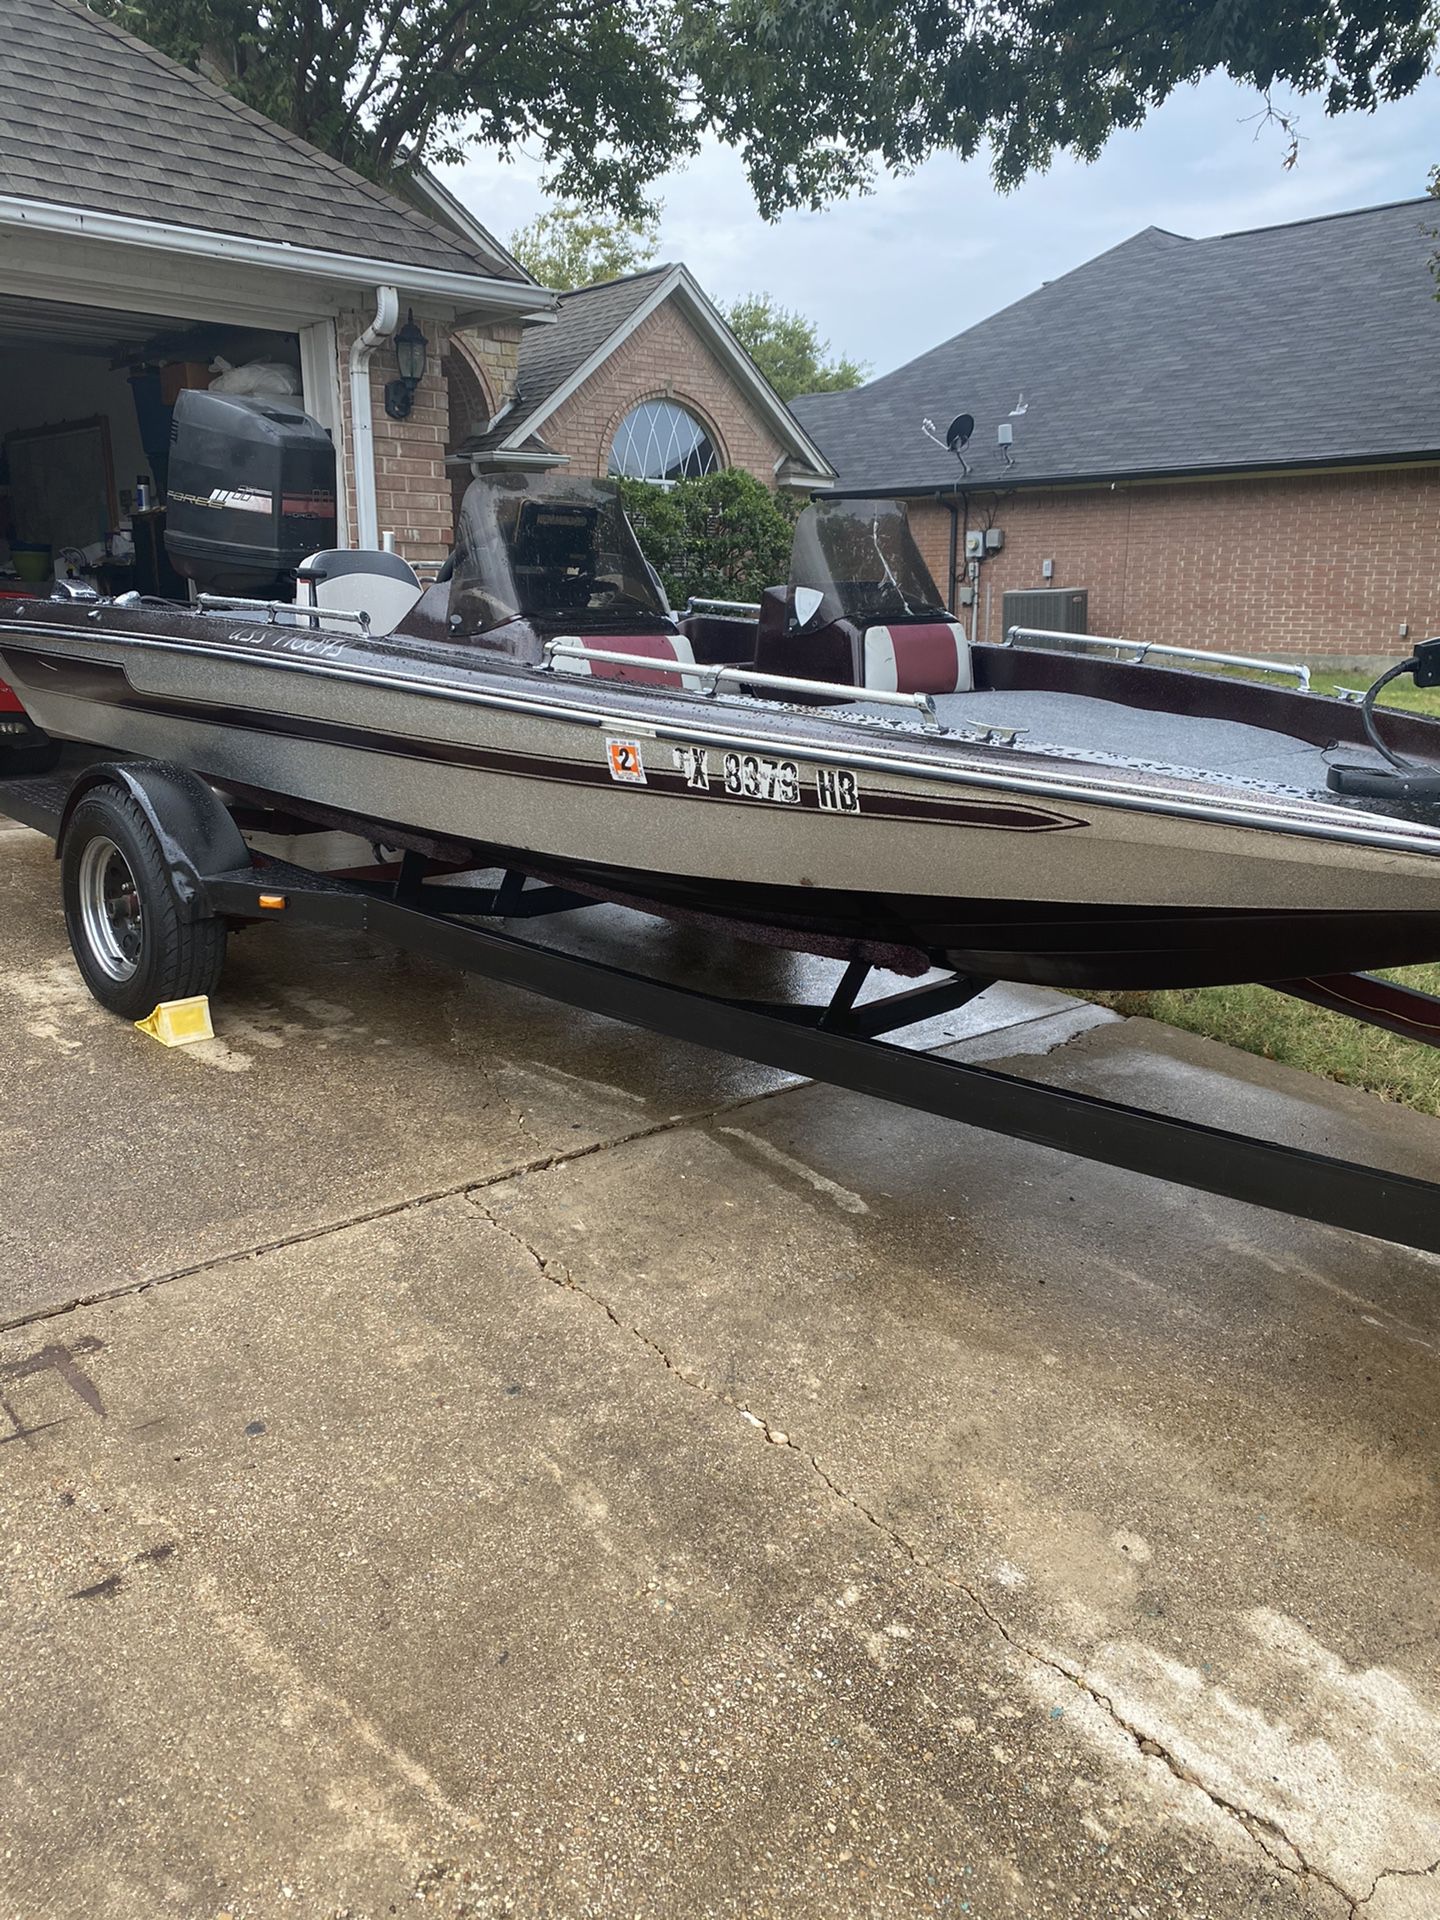 17’ 1993 fishing boat with a150 Mercury/ Force rMotor runs great a few issues on gages